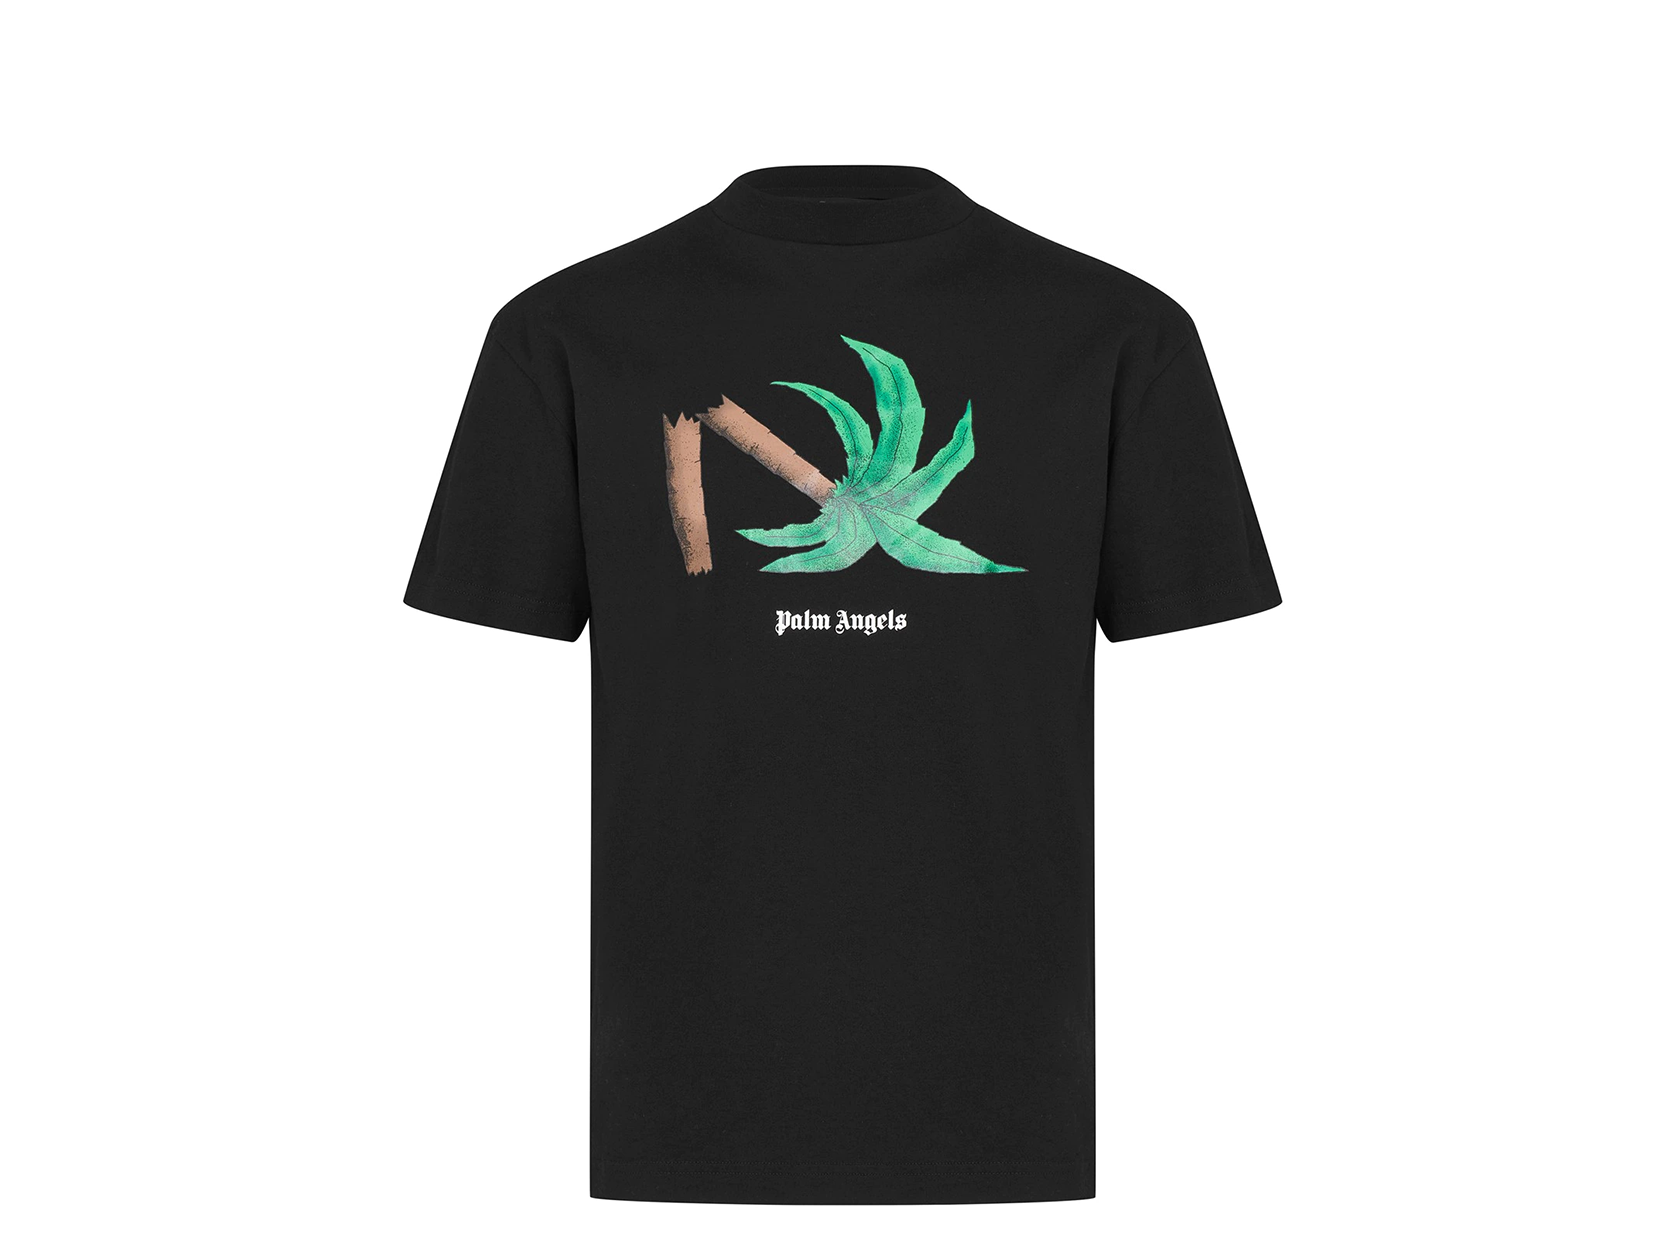 Double Boxed hoodie 244.99 Palm Angels Broken Palm Tree Black T Shirt Double Boxed